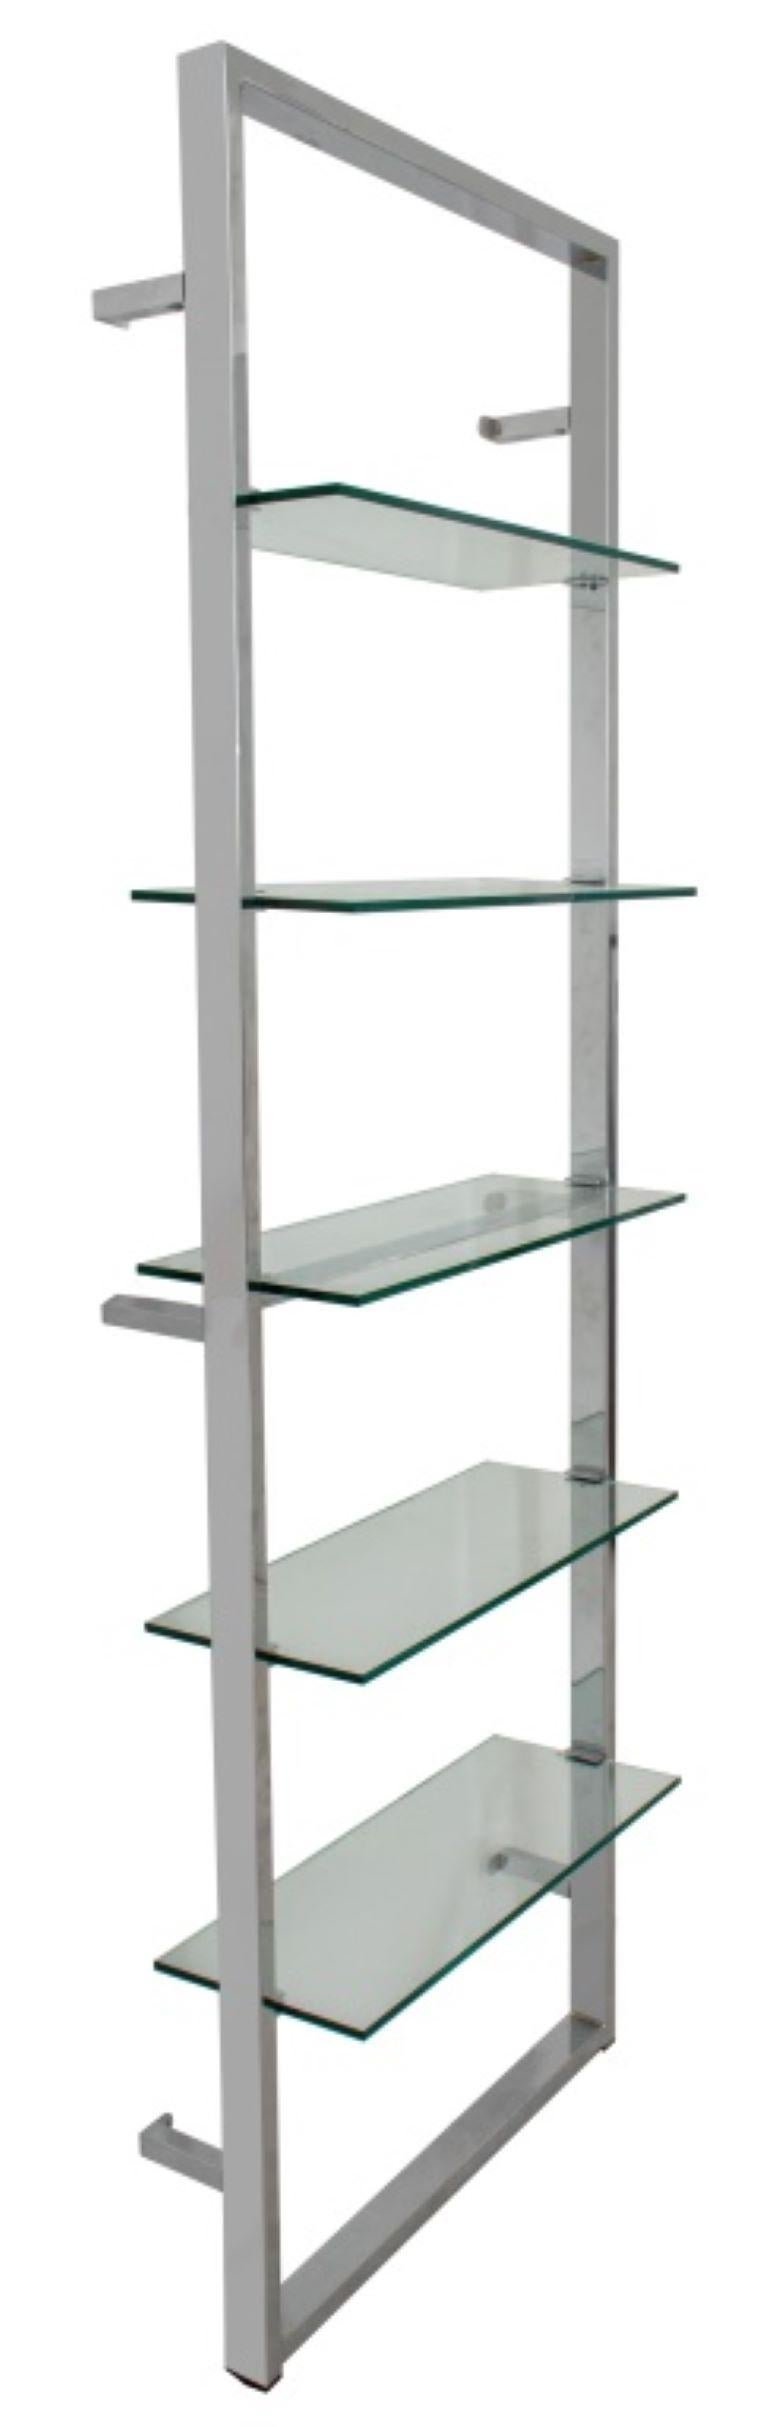 20th Century Streamline Moderne Chrome Wall Mounted Etagere For Sale